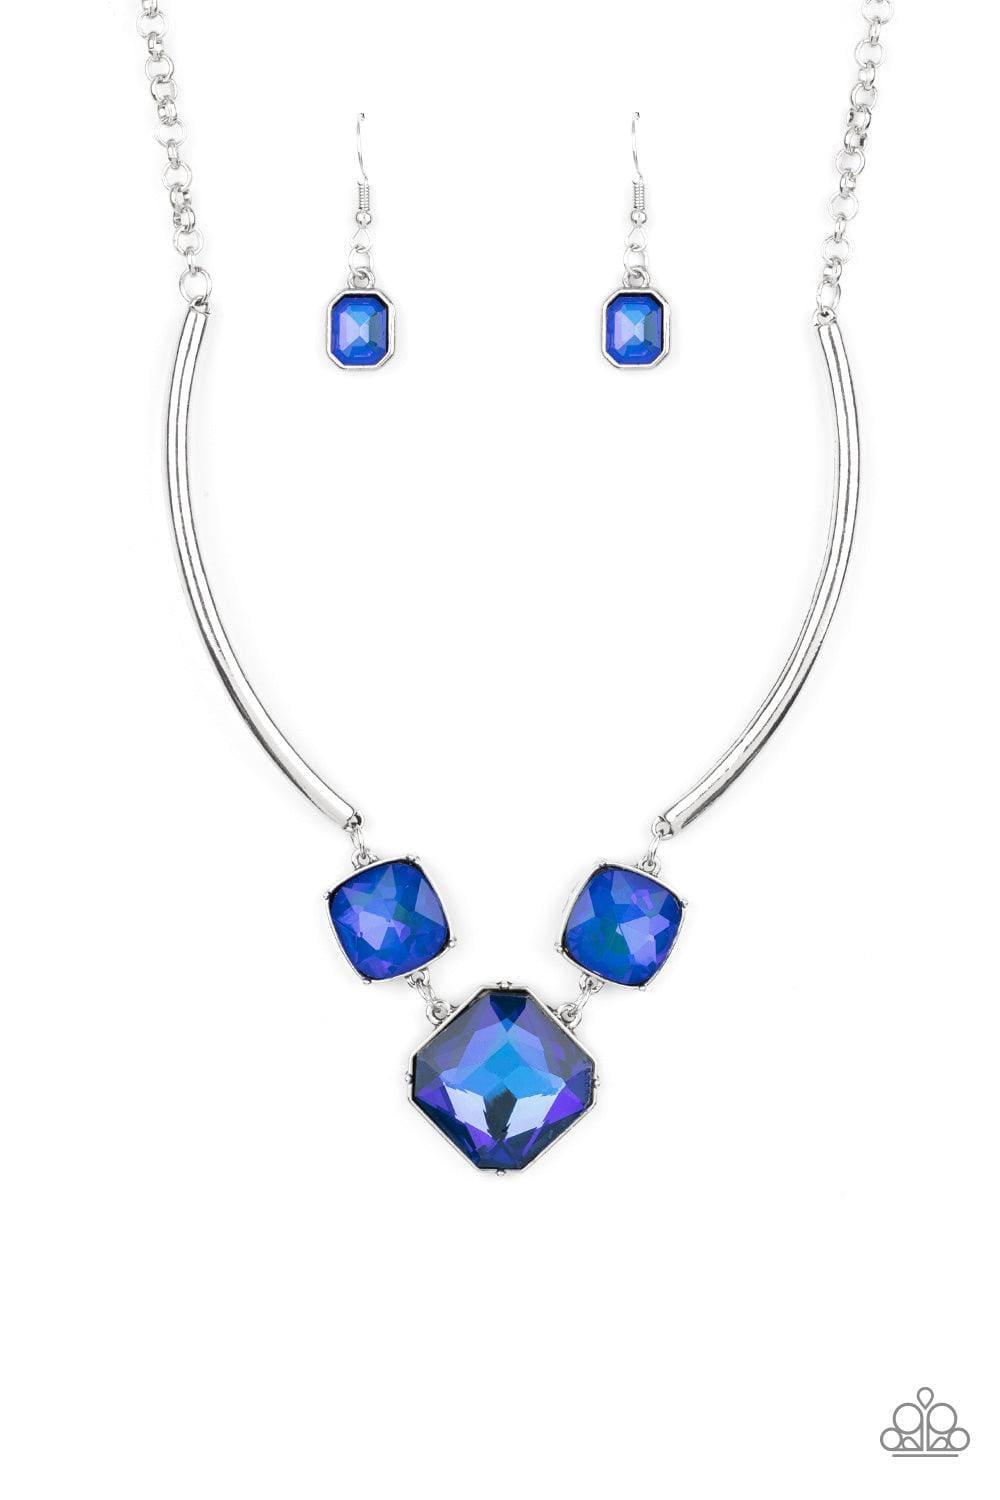 Paparazzi Accessories - Divine Iridescence - Blue Necklace - Bling by JessieK